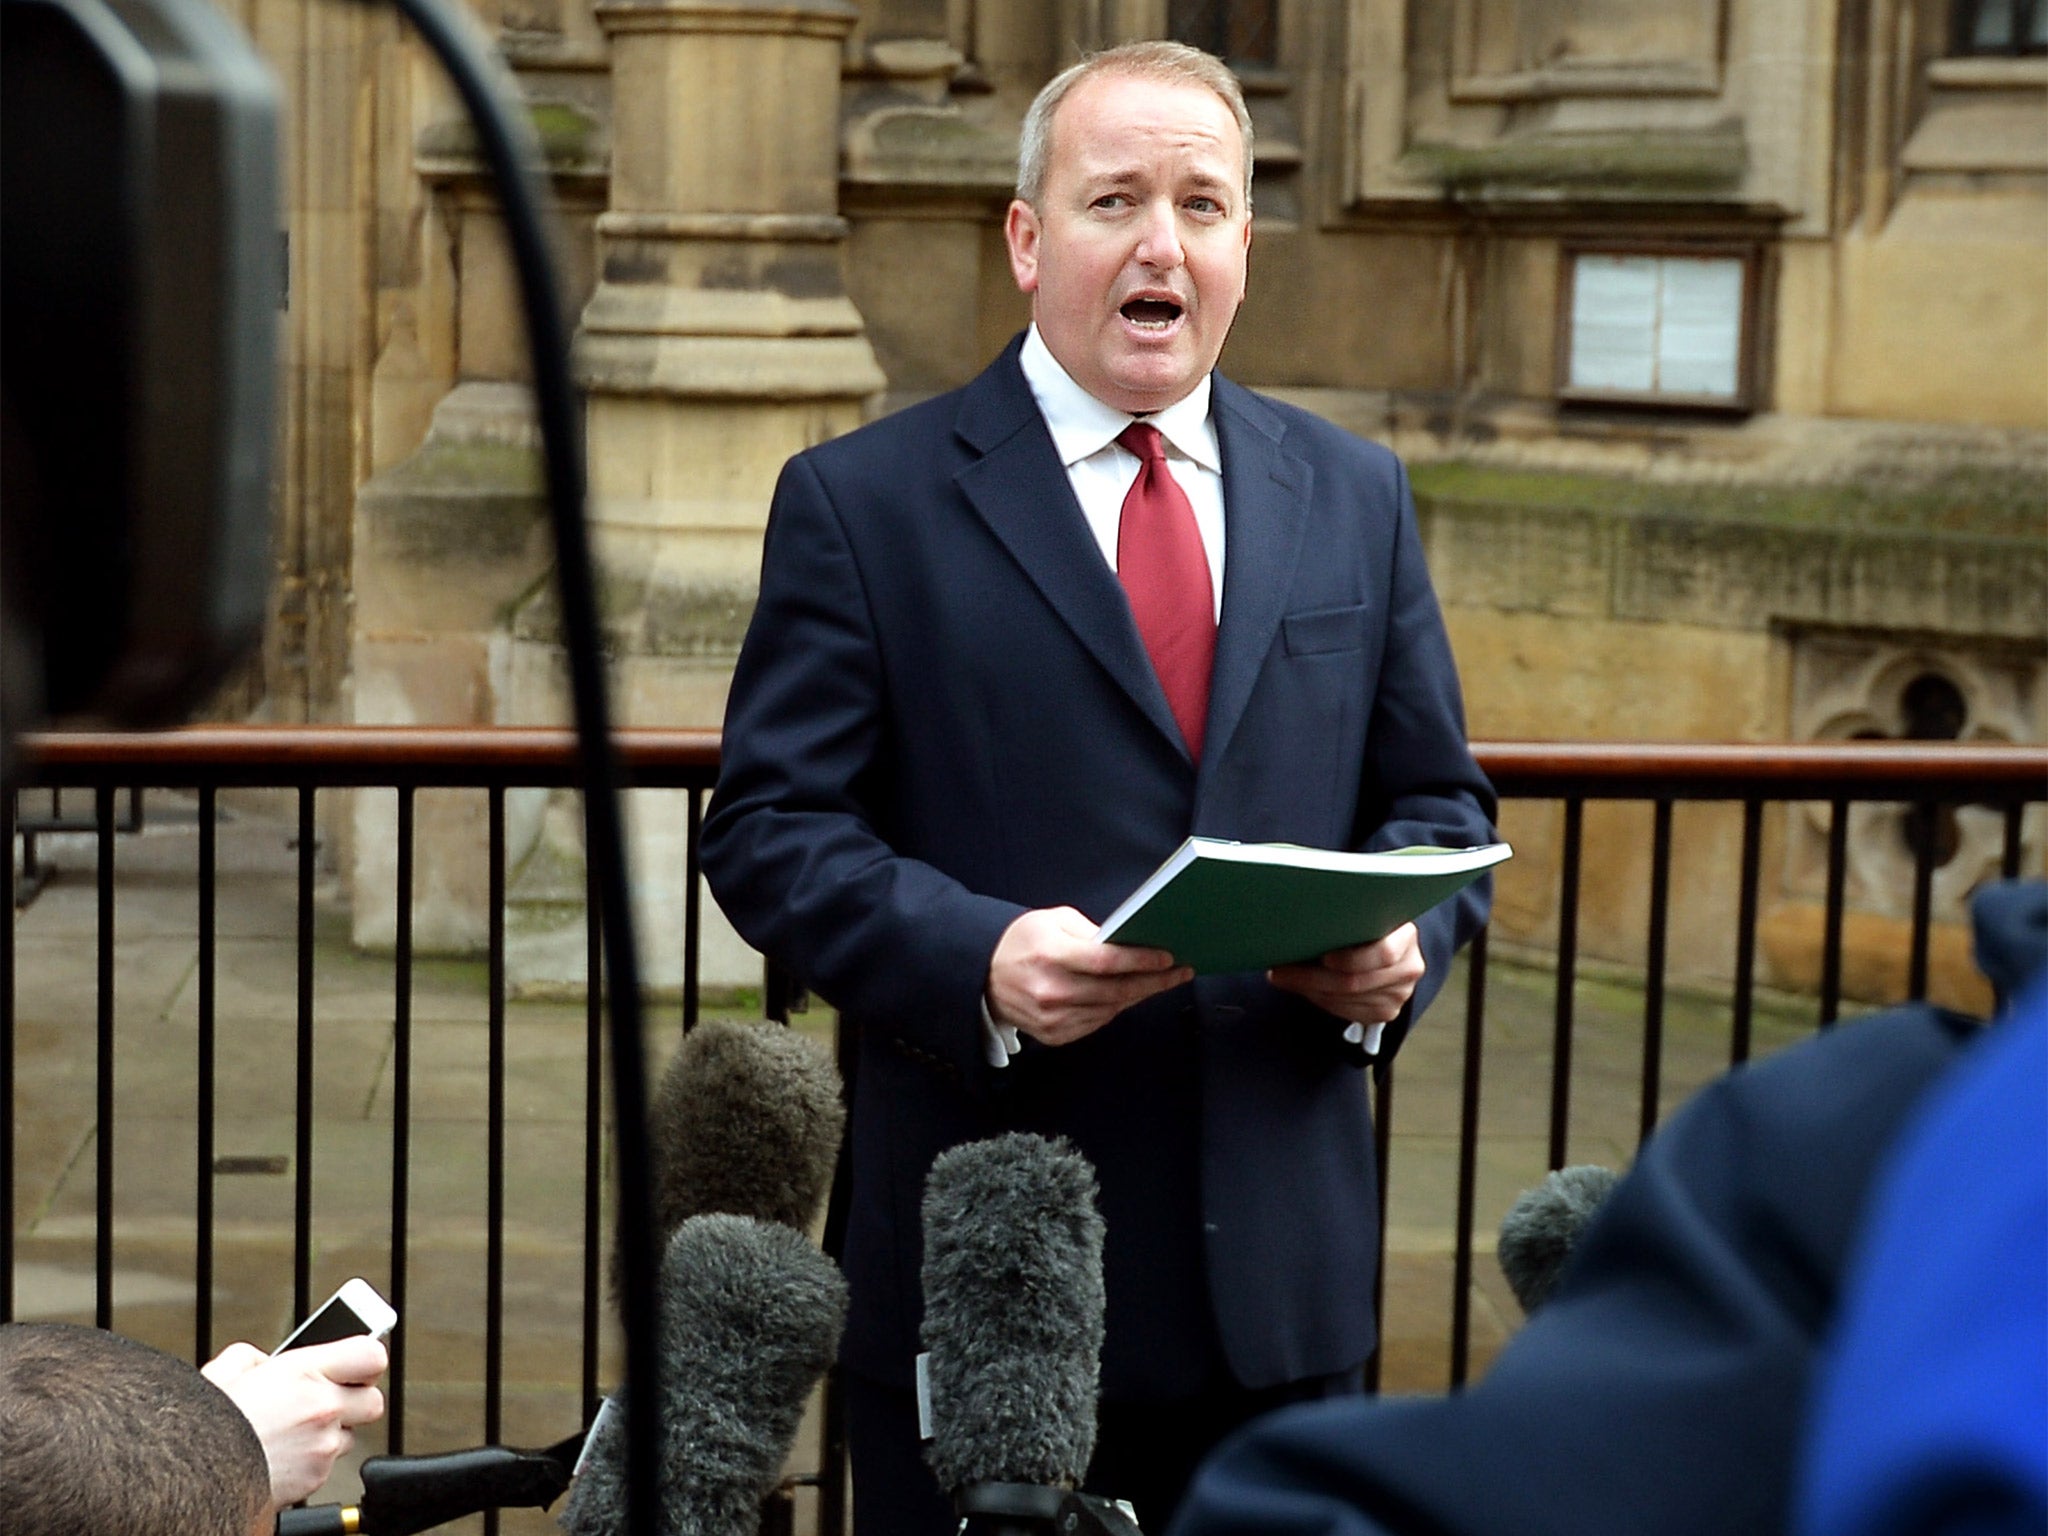 Conservative MP Mark Pritchard reads a statement outside the Houses of Parliament, after the Metropolitan Police dropped an investigation into rape claims against him due to insufficient evidence